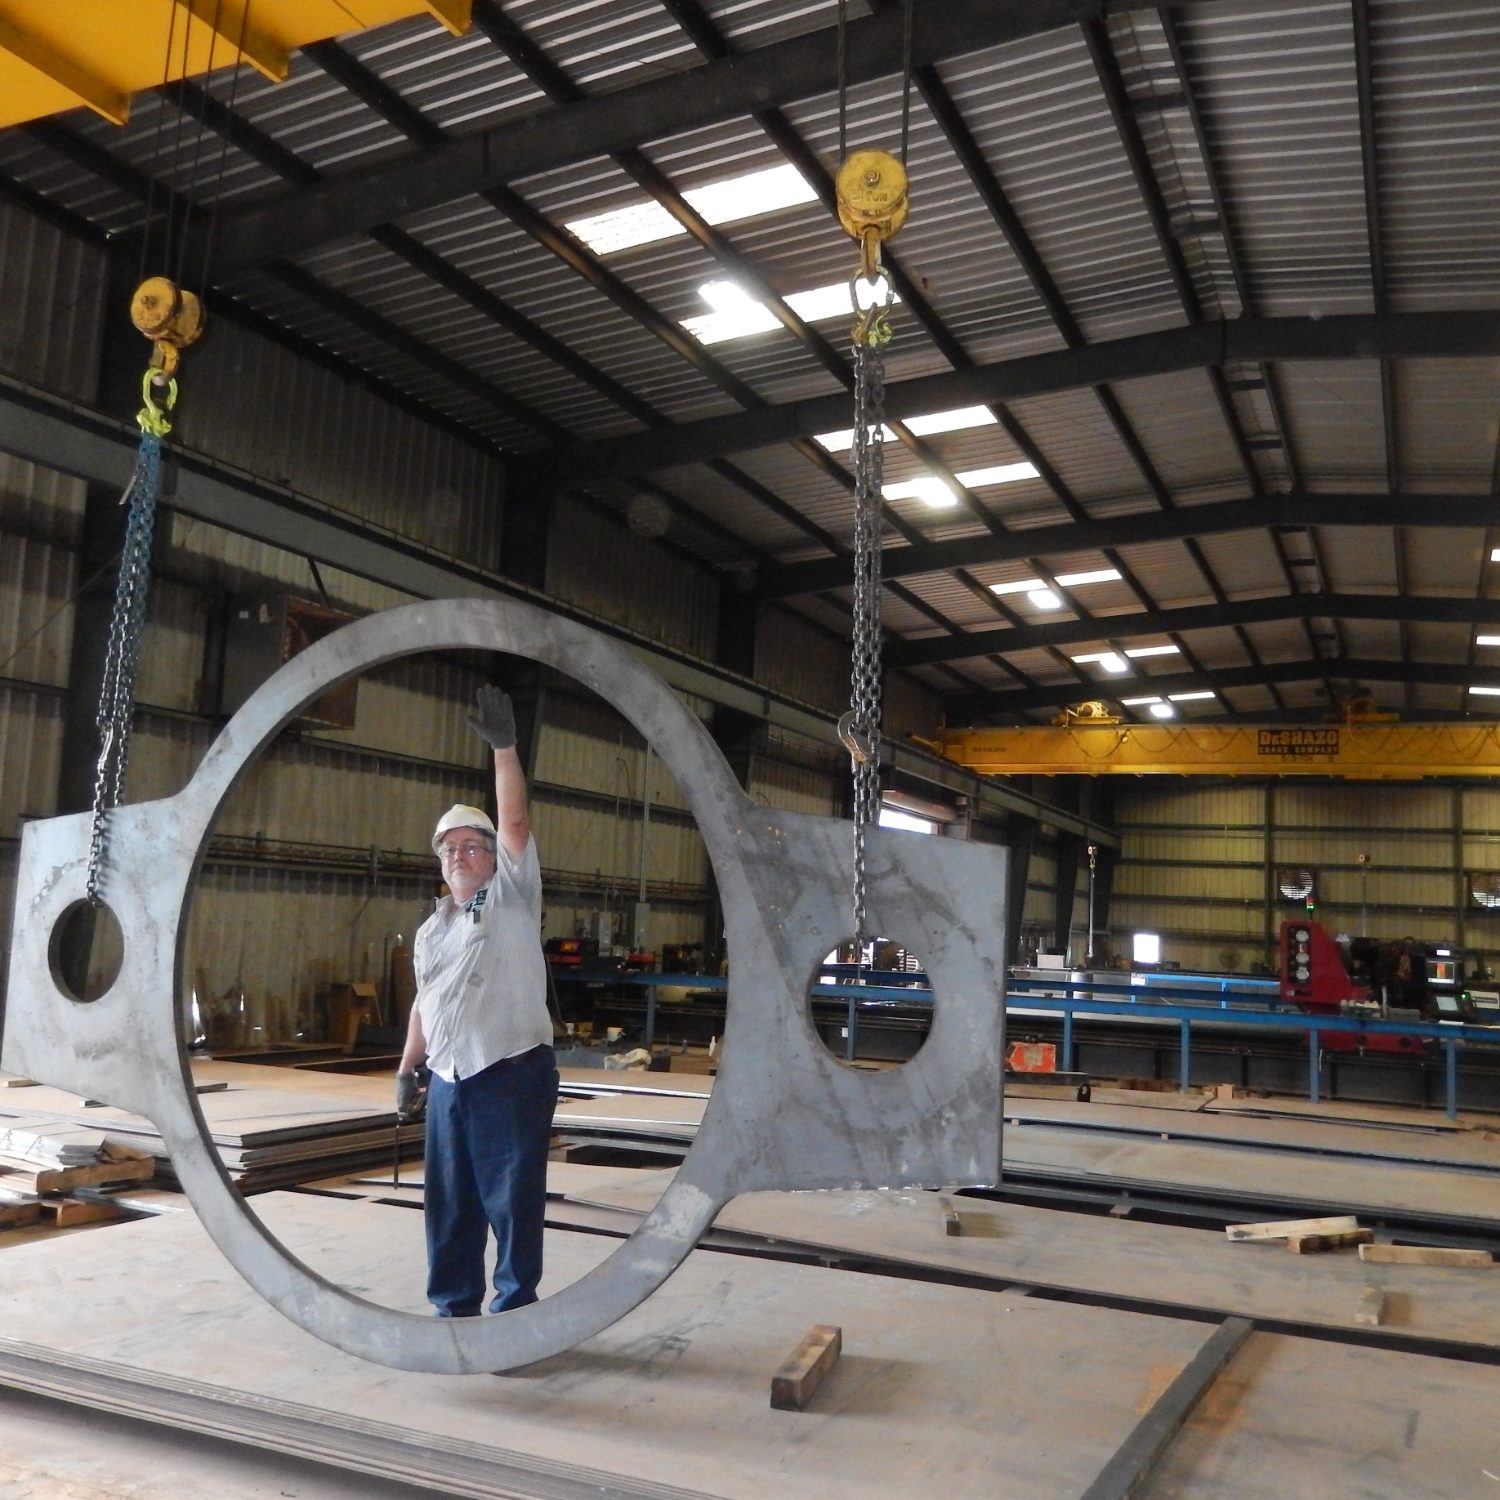 Large Flange Suspended from Crance for Display. Processing Services